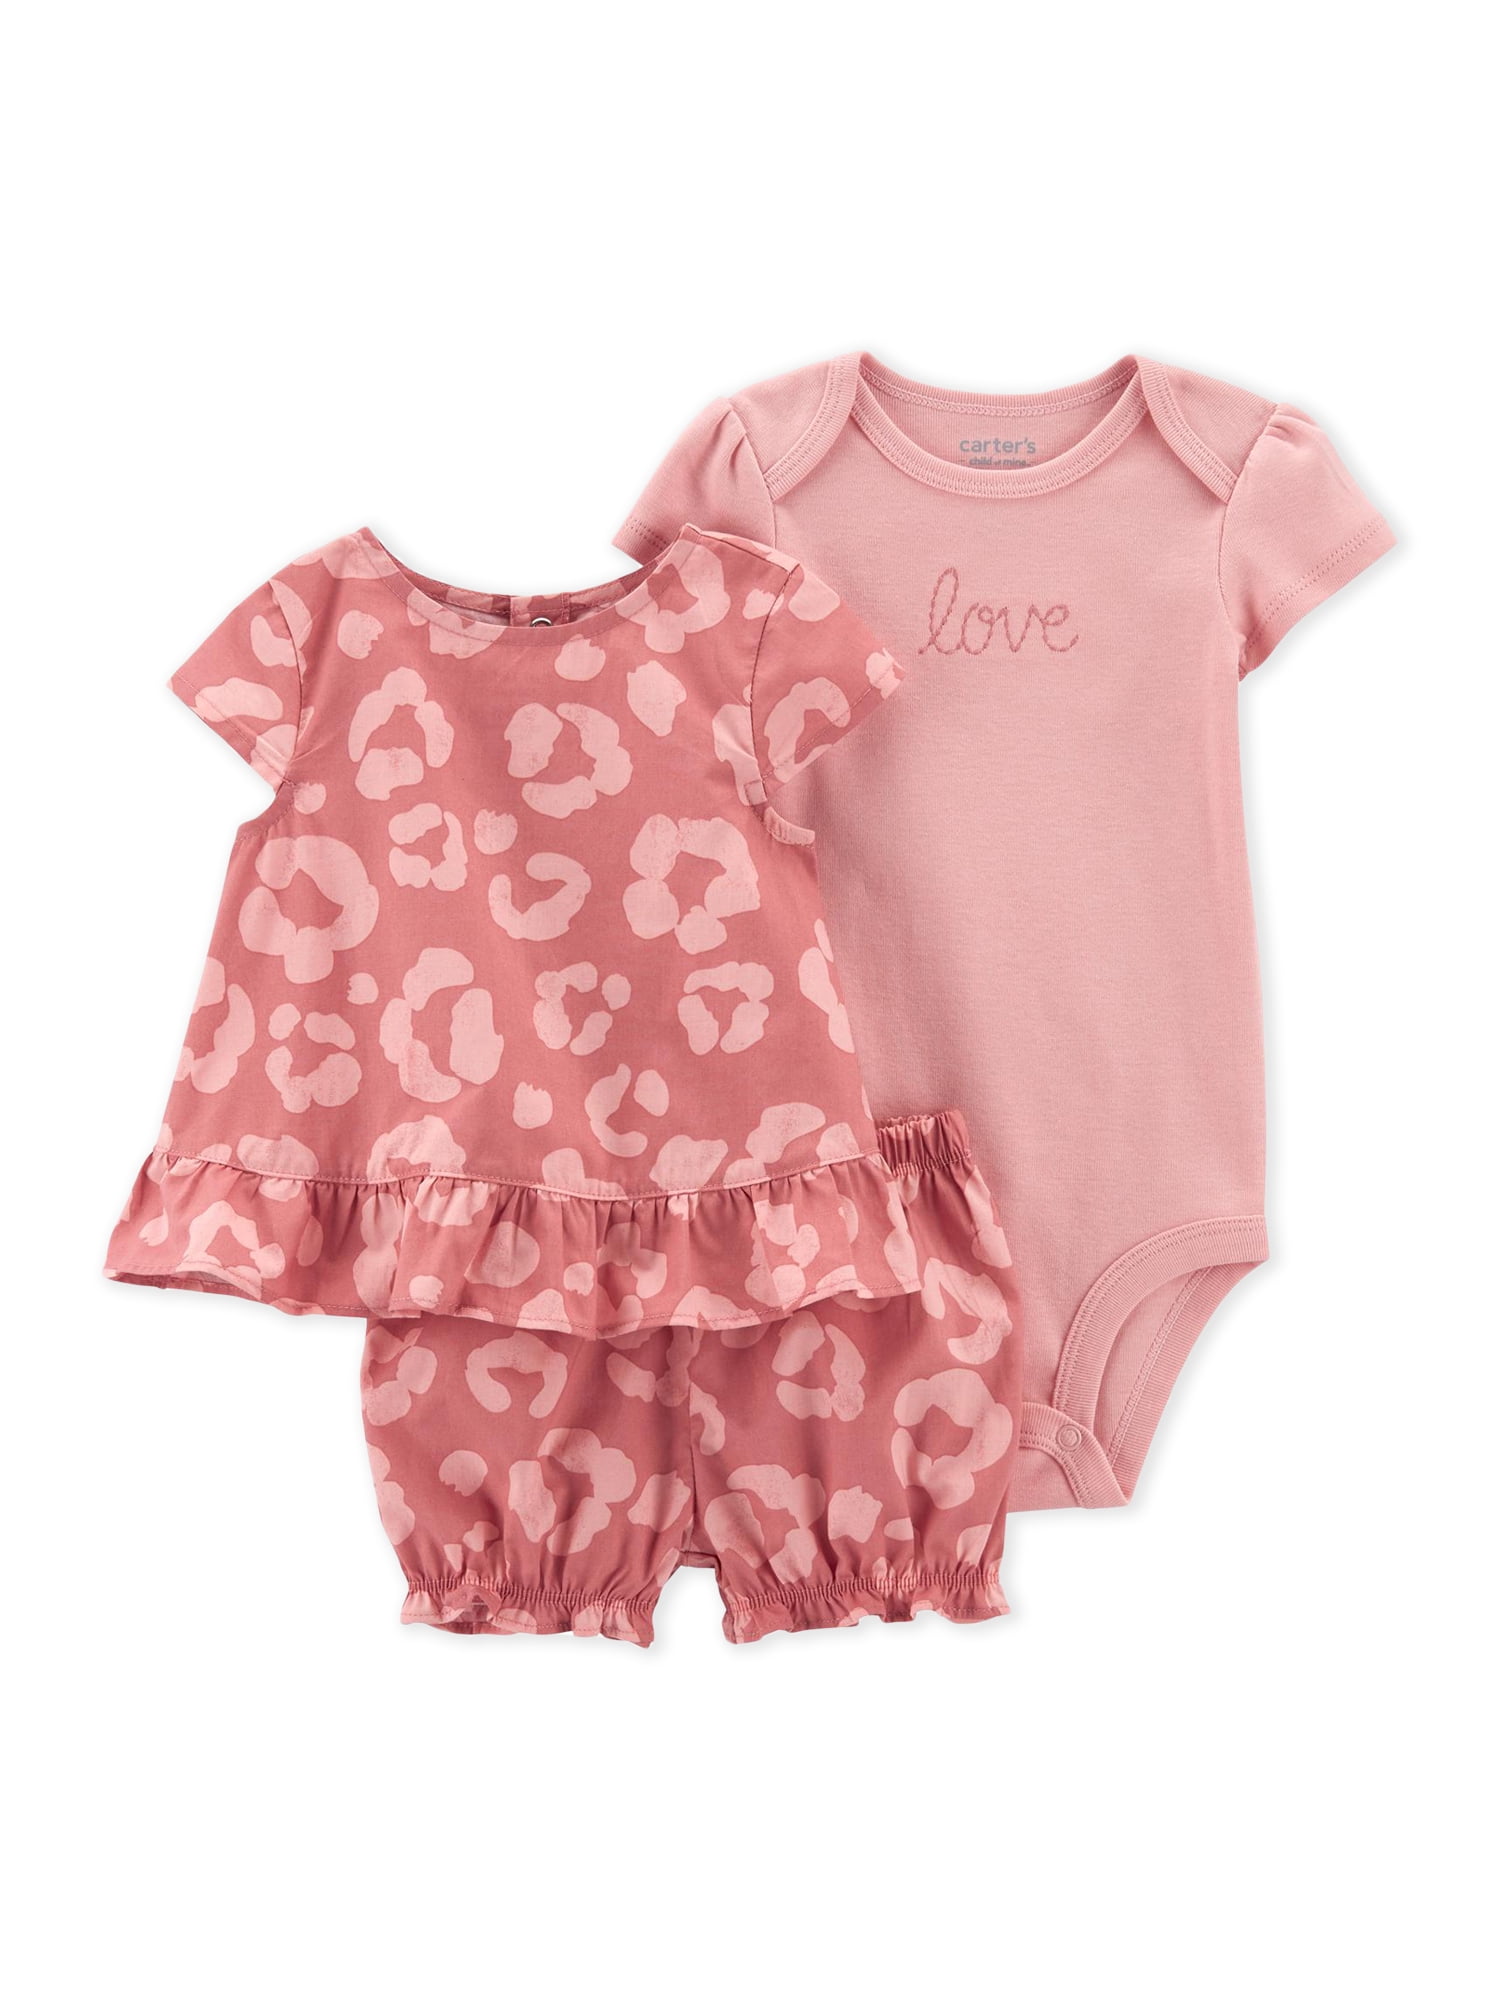 Carter's Child of Mine Baby Girl Outfit Set, 3-Piece, Sizes 0-24 Months